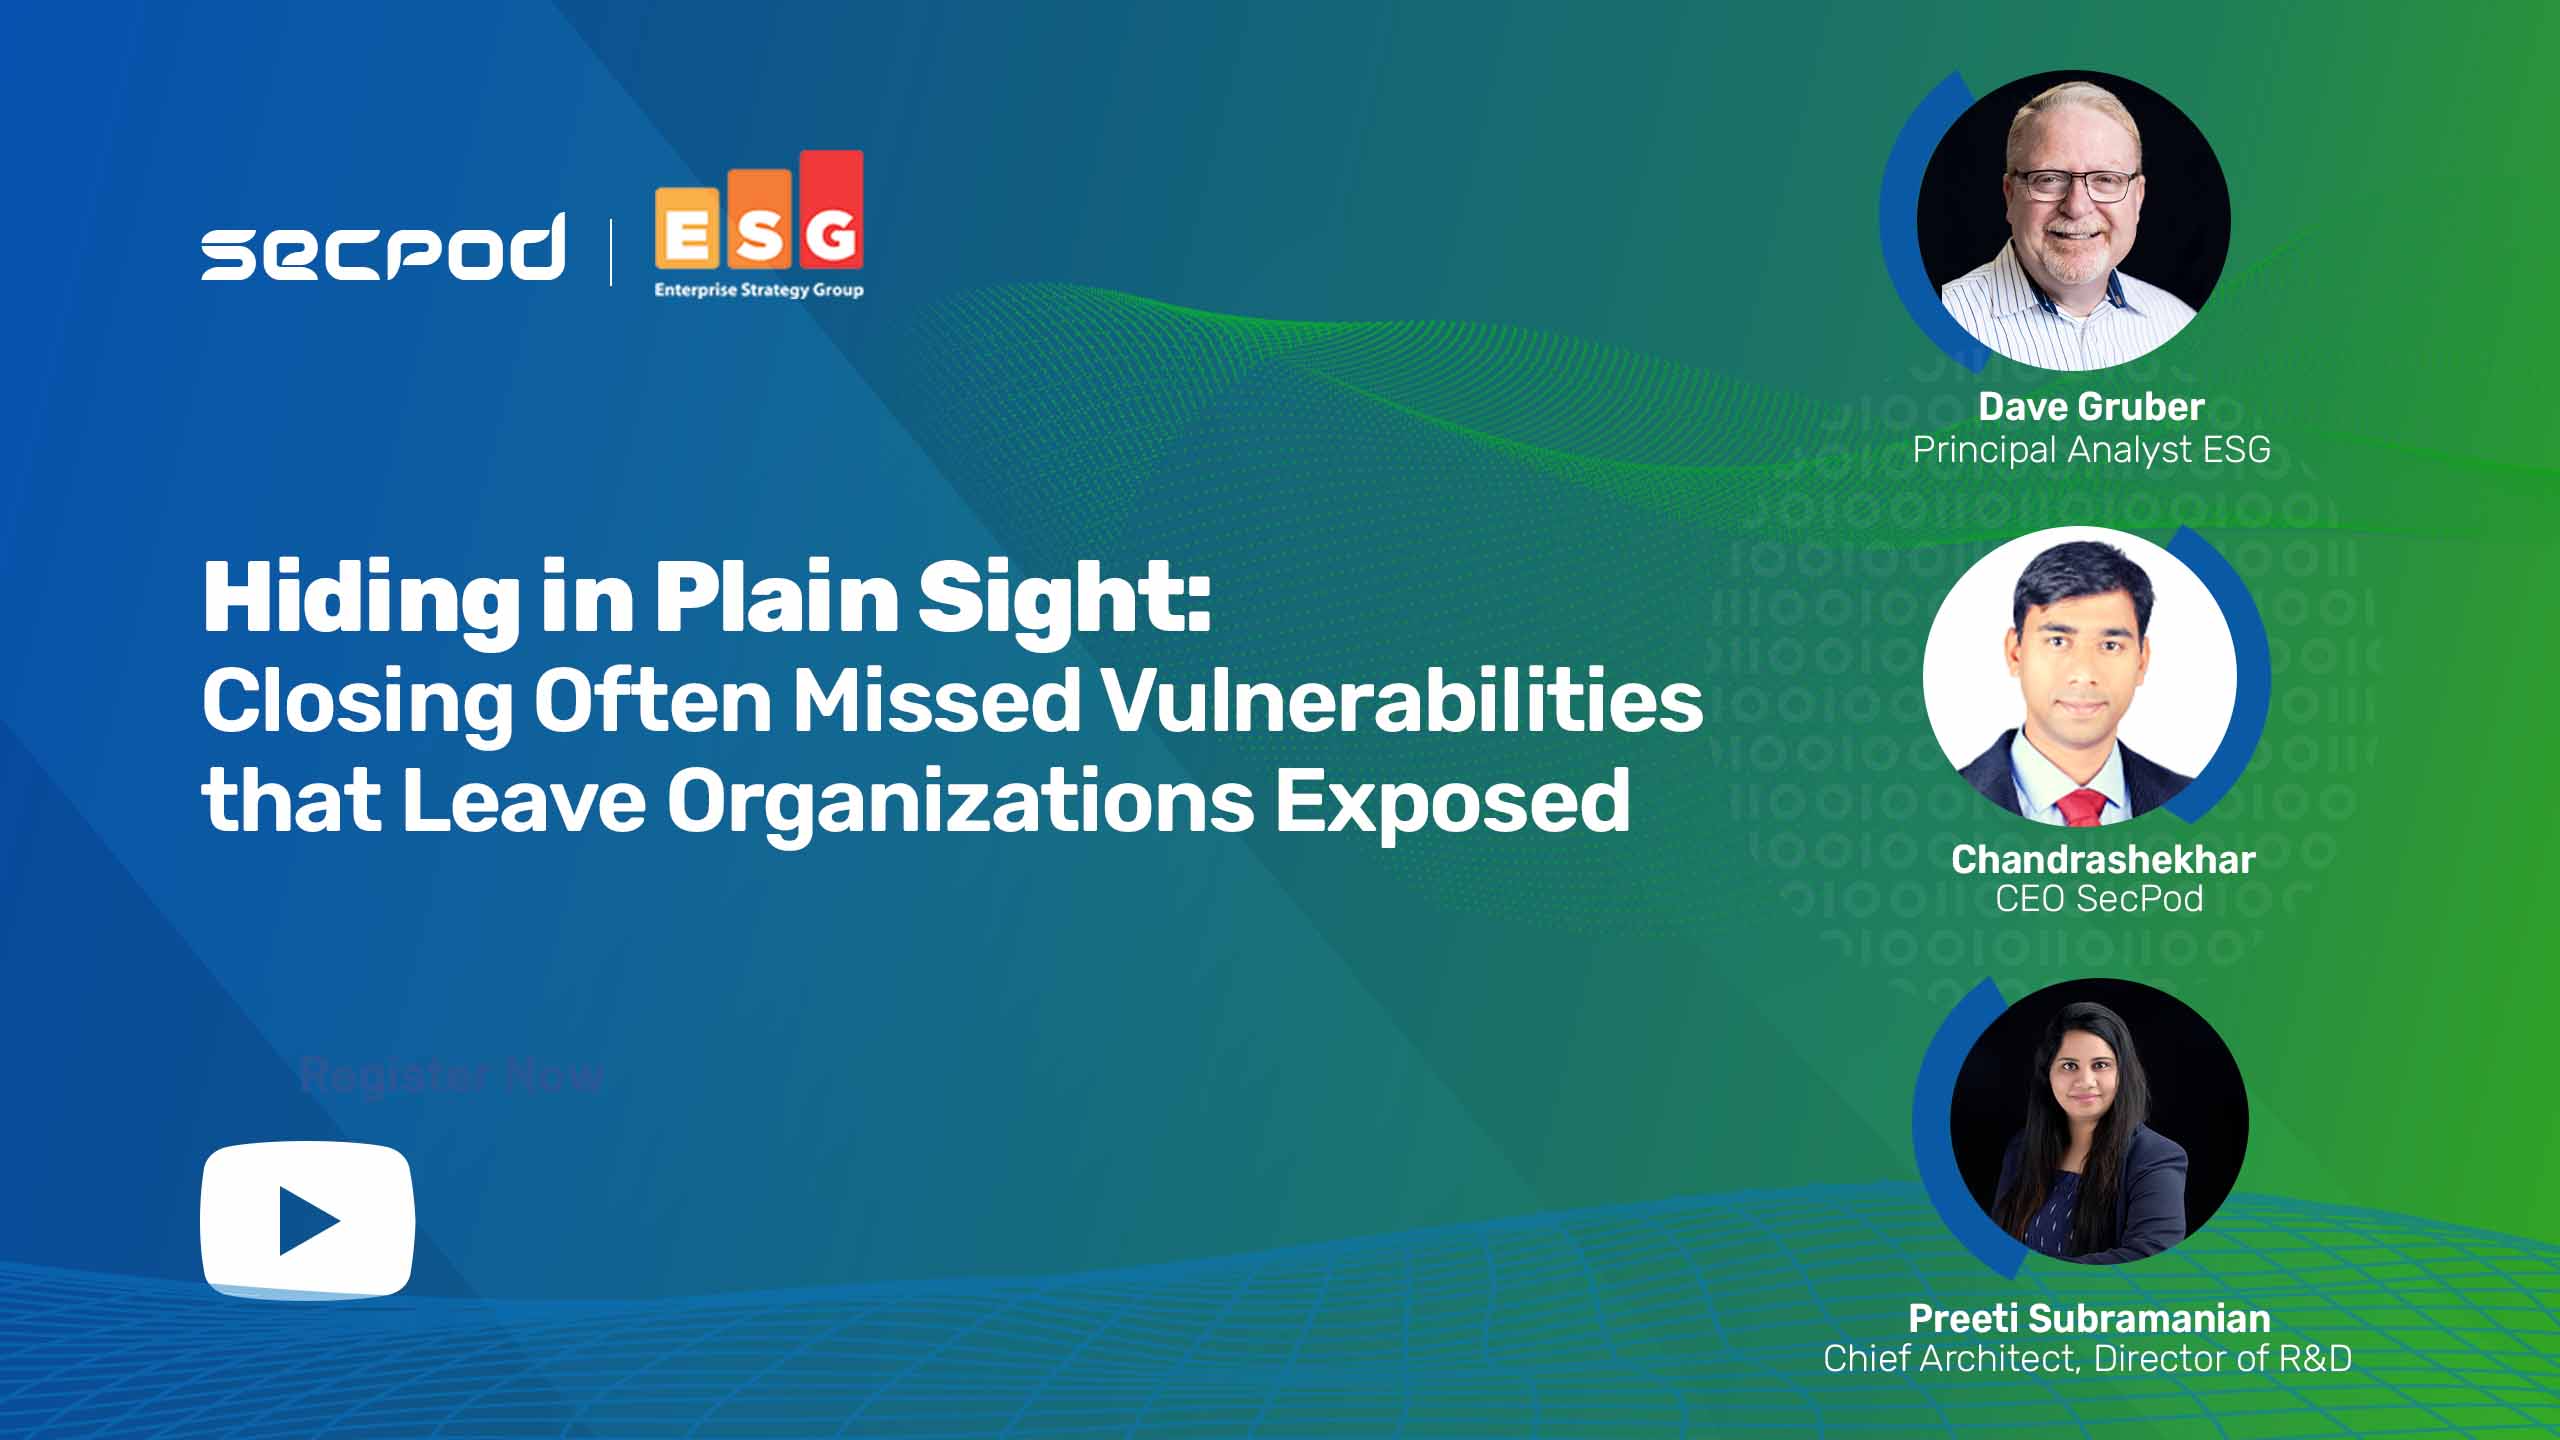 SecPod Industry Series- Closing Often Missed Vulnerabilities that Leave Organizations Exposed